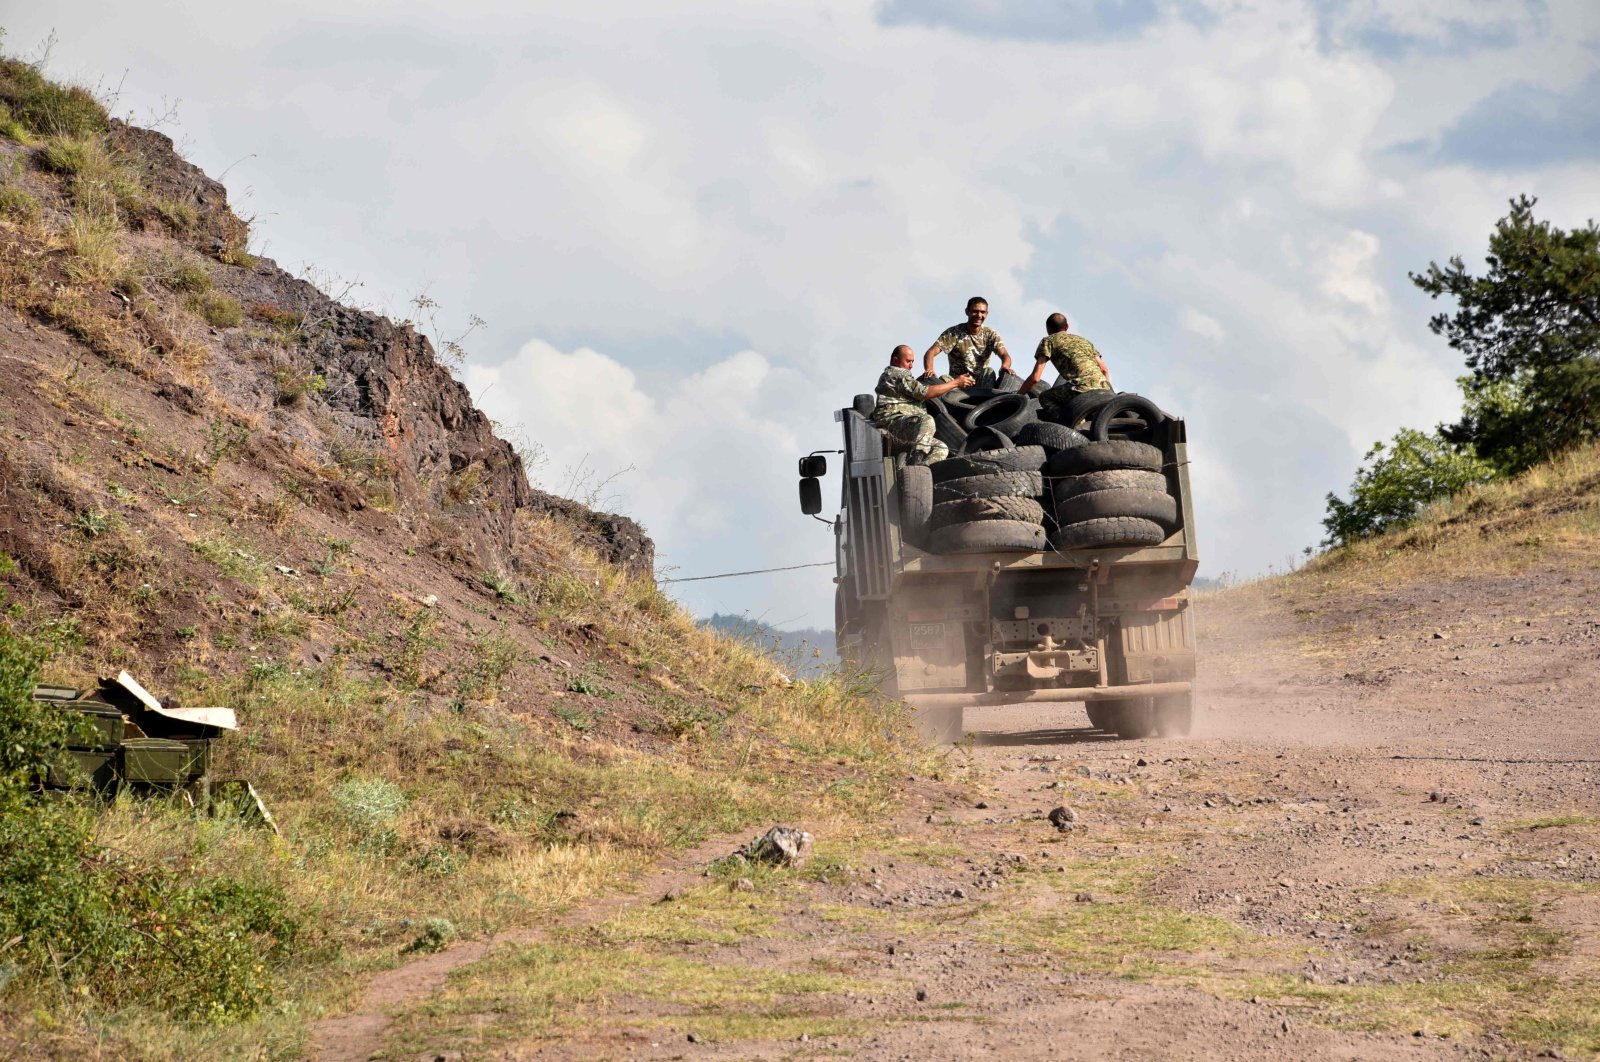 Armenian servicemen transport used tyres in the back of a truck to fortify their positions on the Armenian-Azerbaijani border near the village of Movses on July 15, 2020. (AFP Photo)